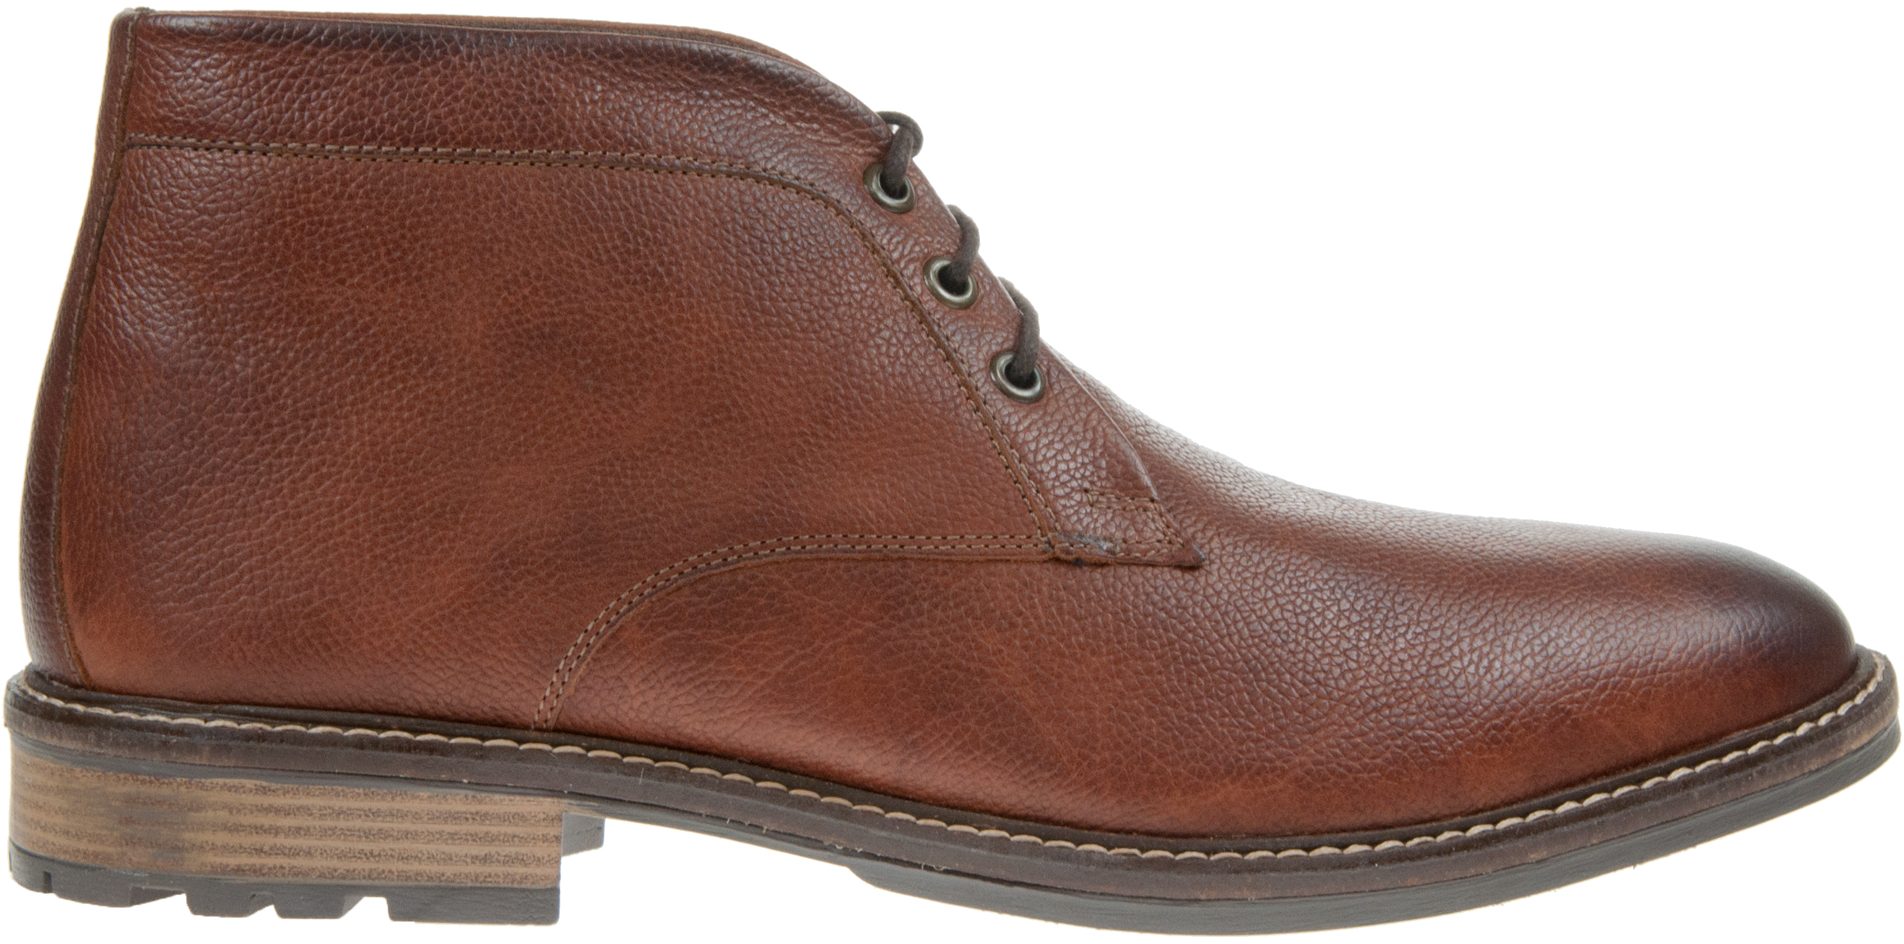 Catesby 814 Marron C814M - Formal Boots - Humphries Shoes